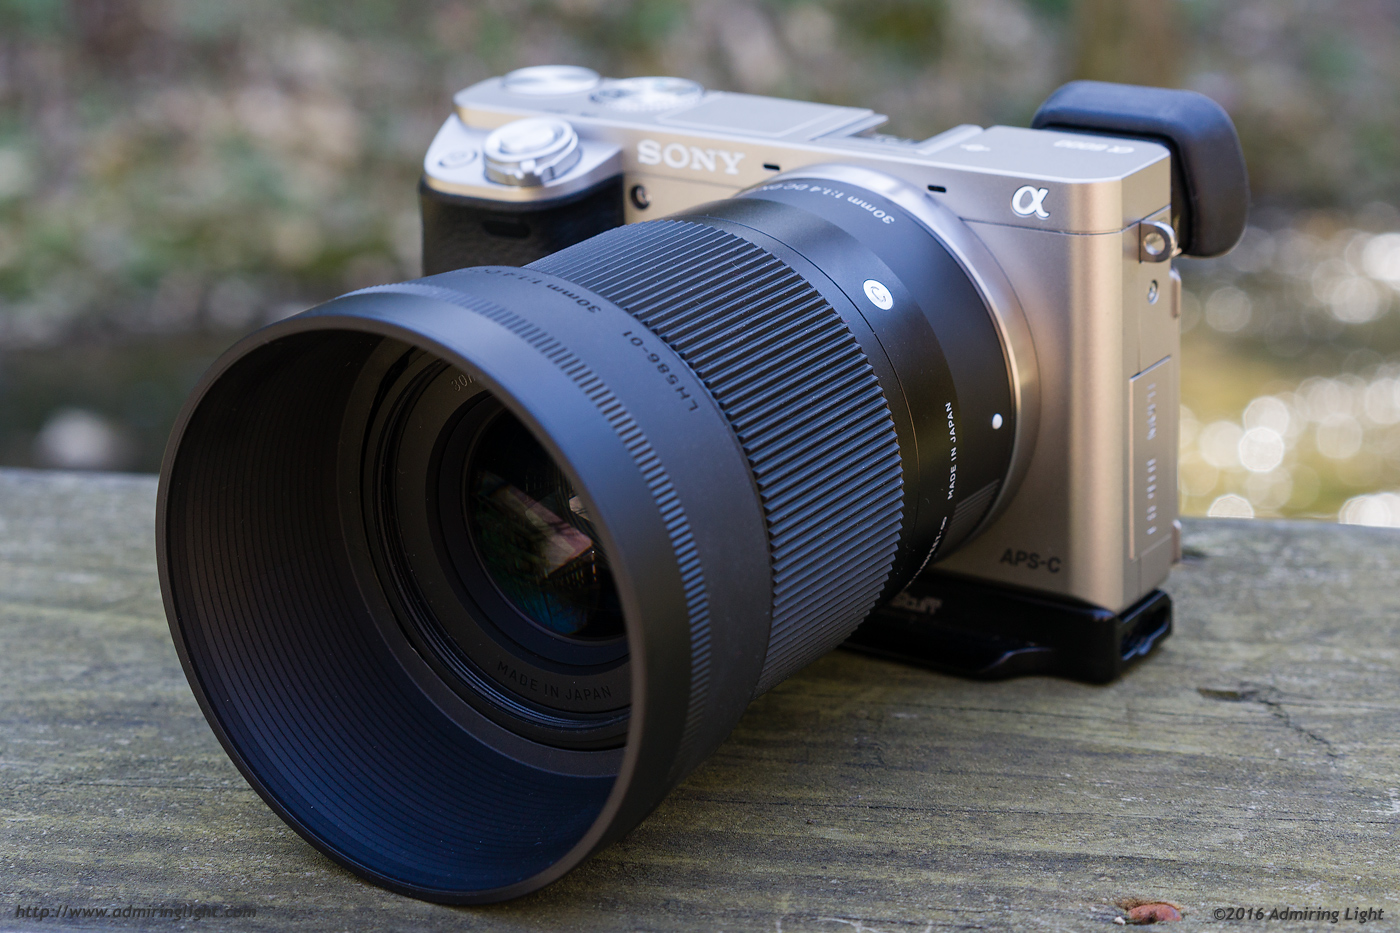 Review: Sigma 30mm f/1.4 DC DN (Sony E-Mount) - Admiring Light